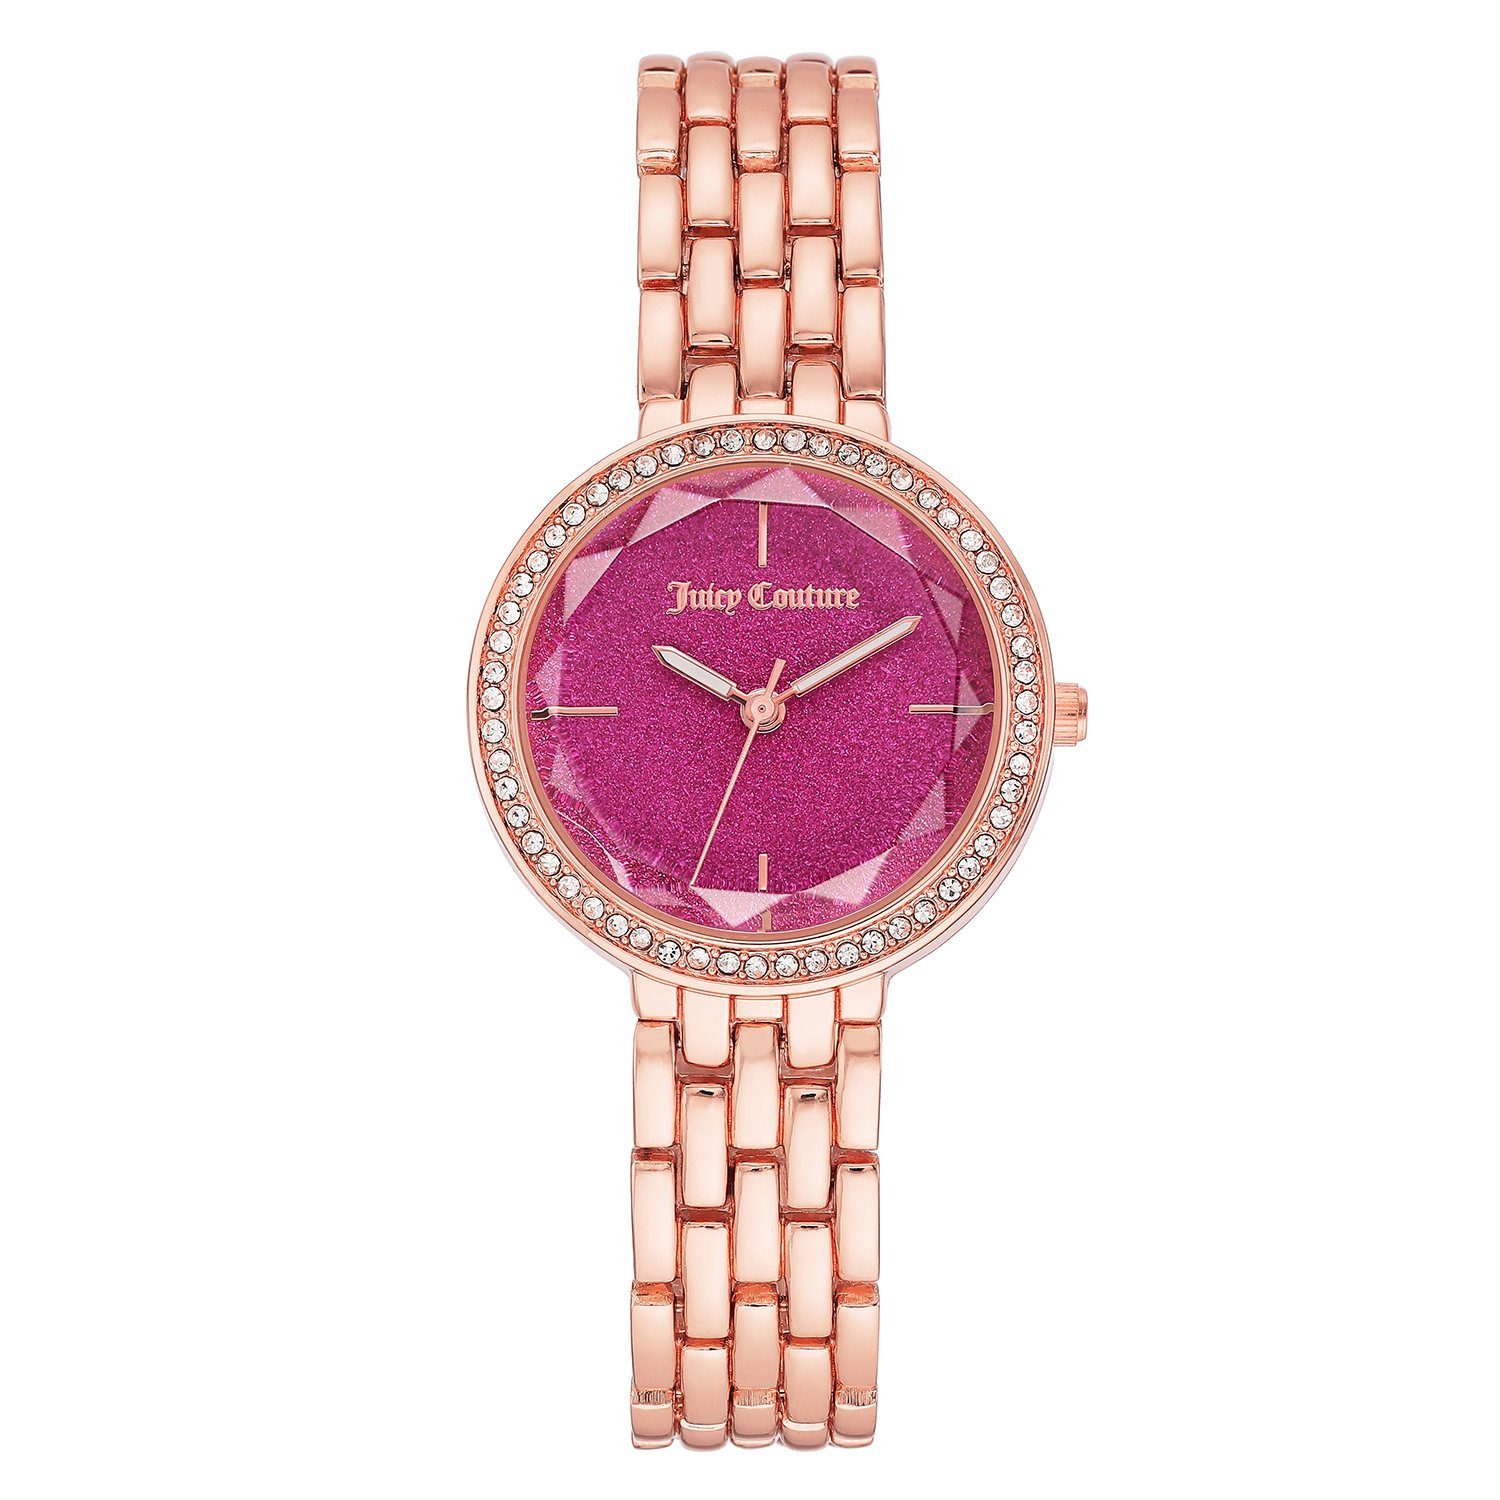 JC/1208HPRG Juicy Couture Digitaluhr